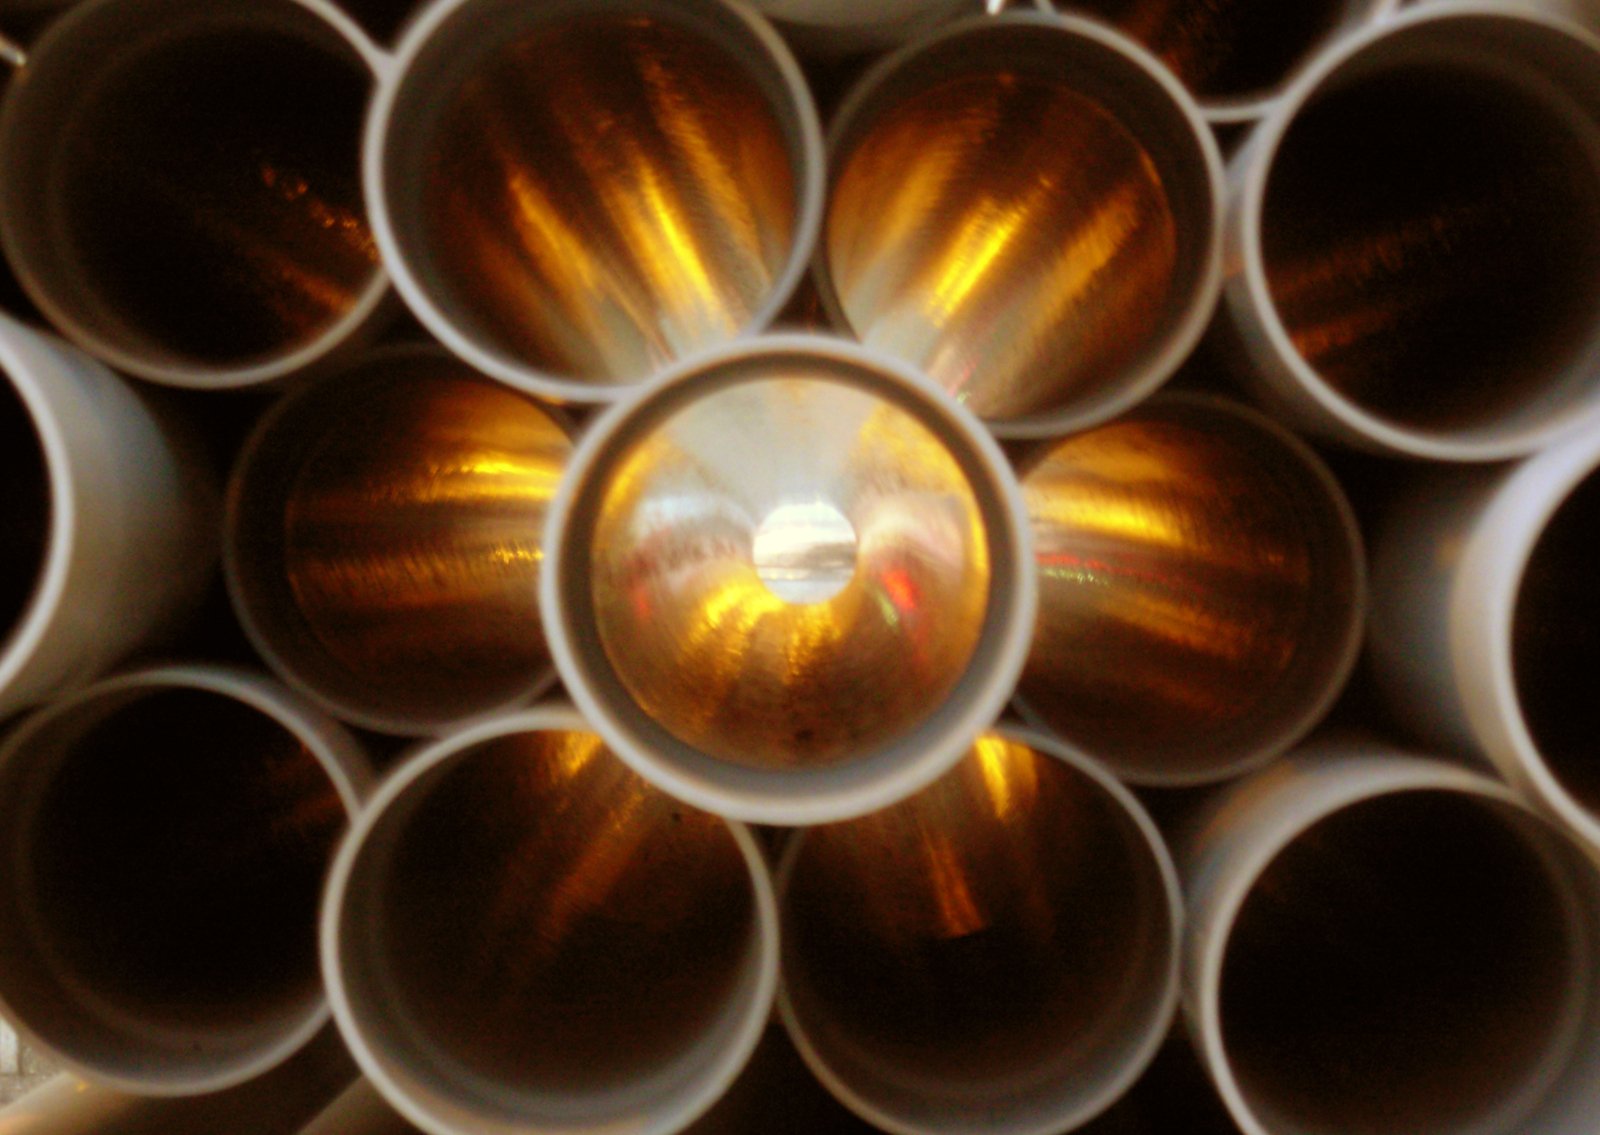 there are many pipes arranged in the pattern